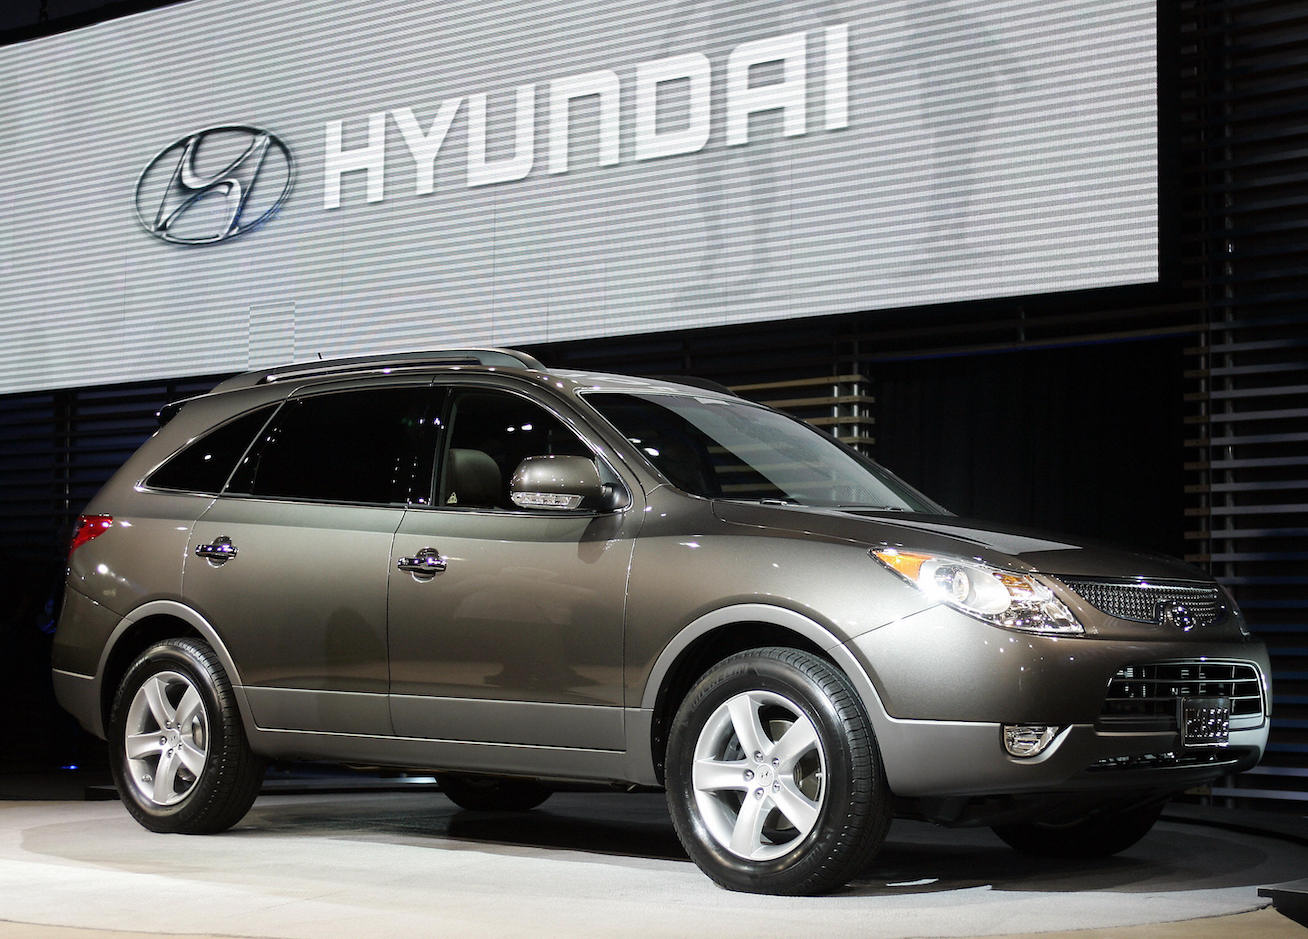 The new 2007 Veracruz Hyundai is pictured 08 January 2007 during the press days at the North American International Auto Show. It's now one of the most reliable SUV.